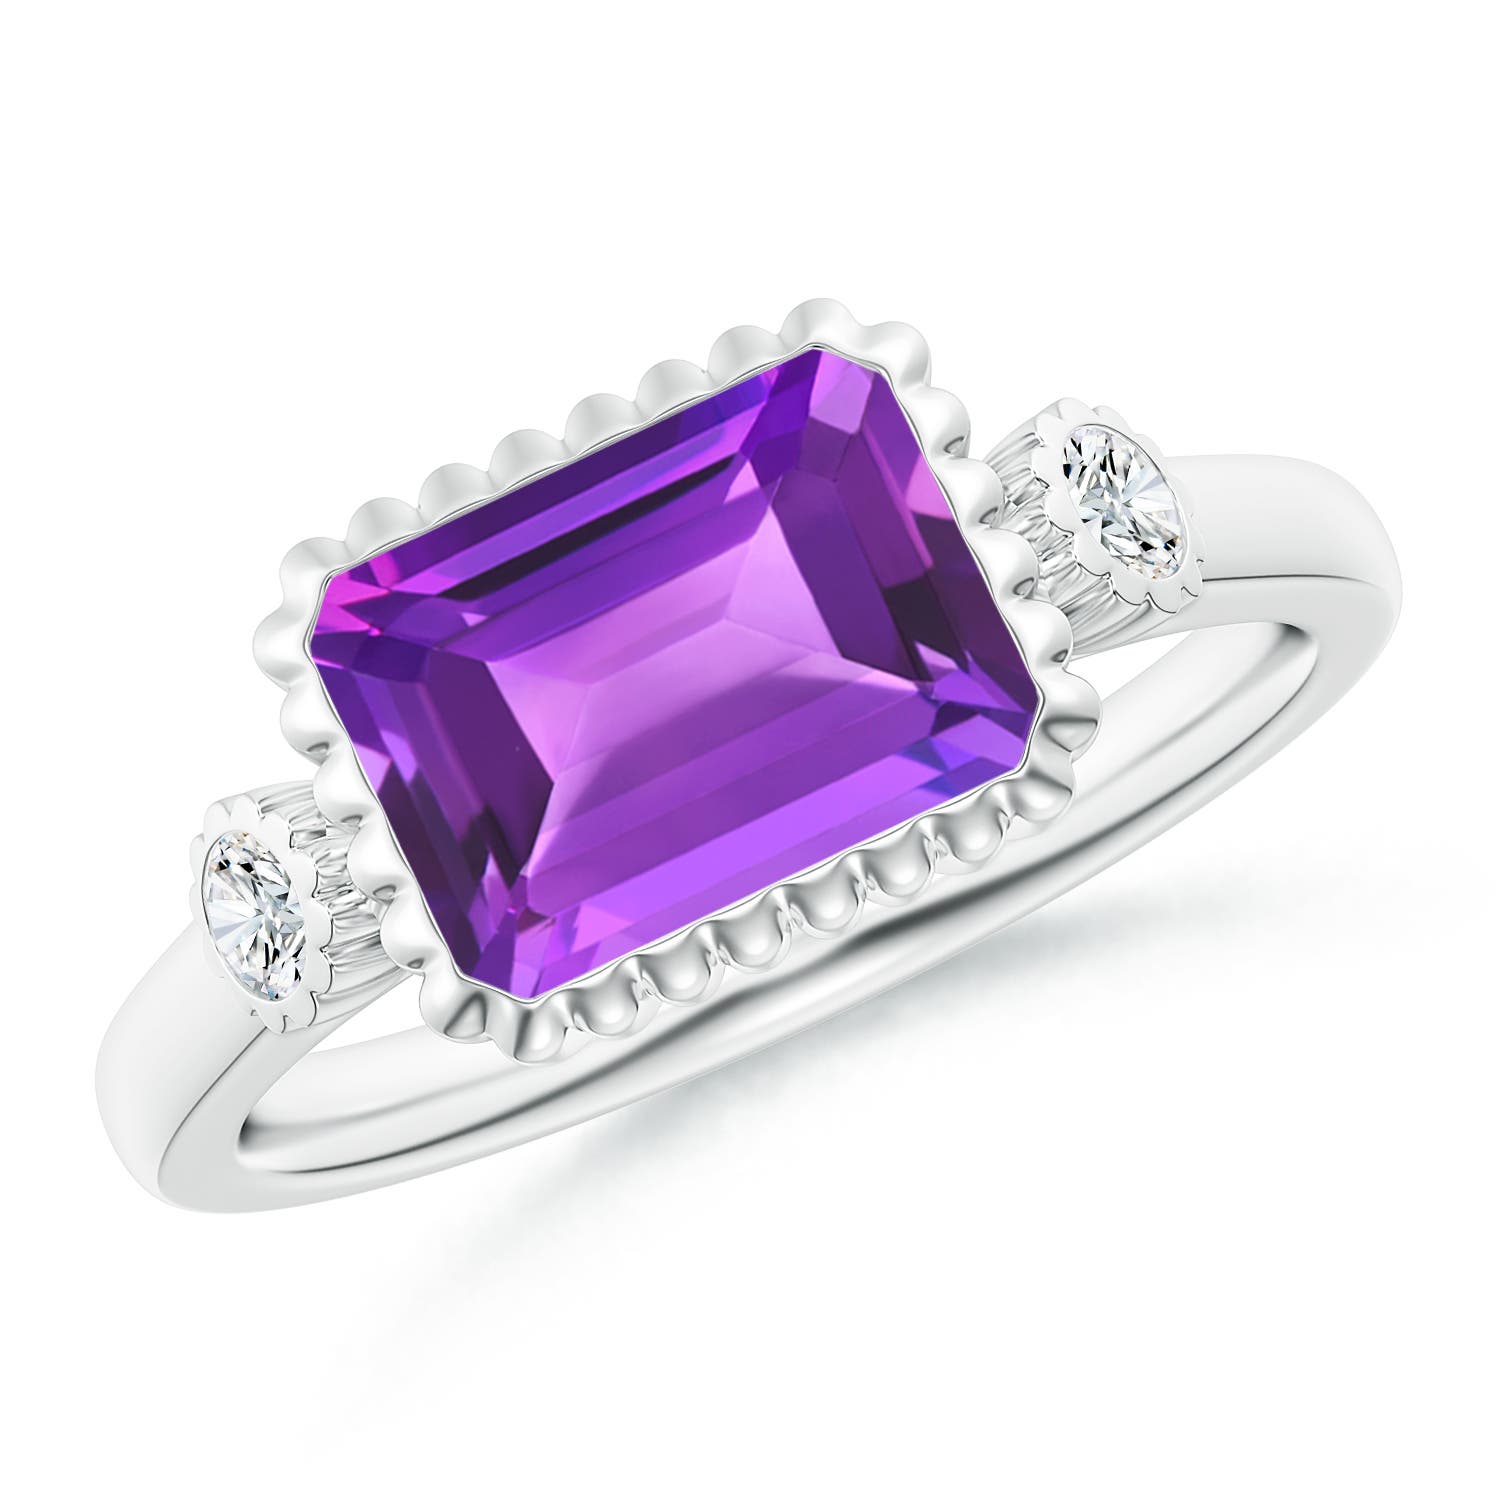 AAA - Amethyst / 2.34 CT / 14 KT White Gold